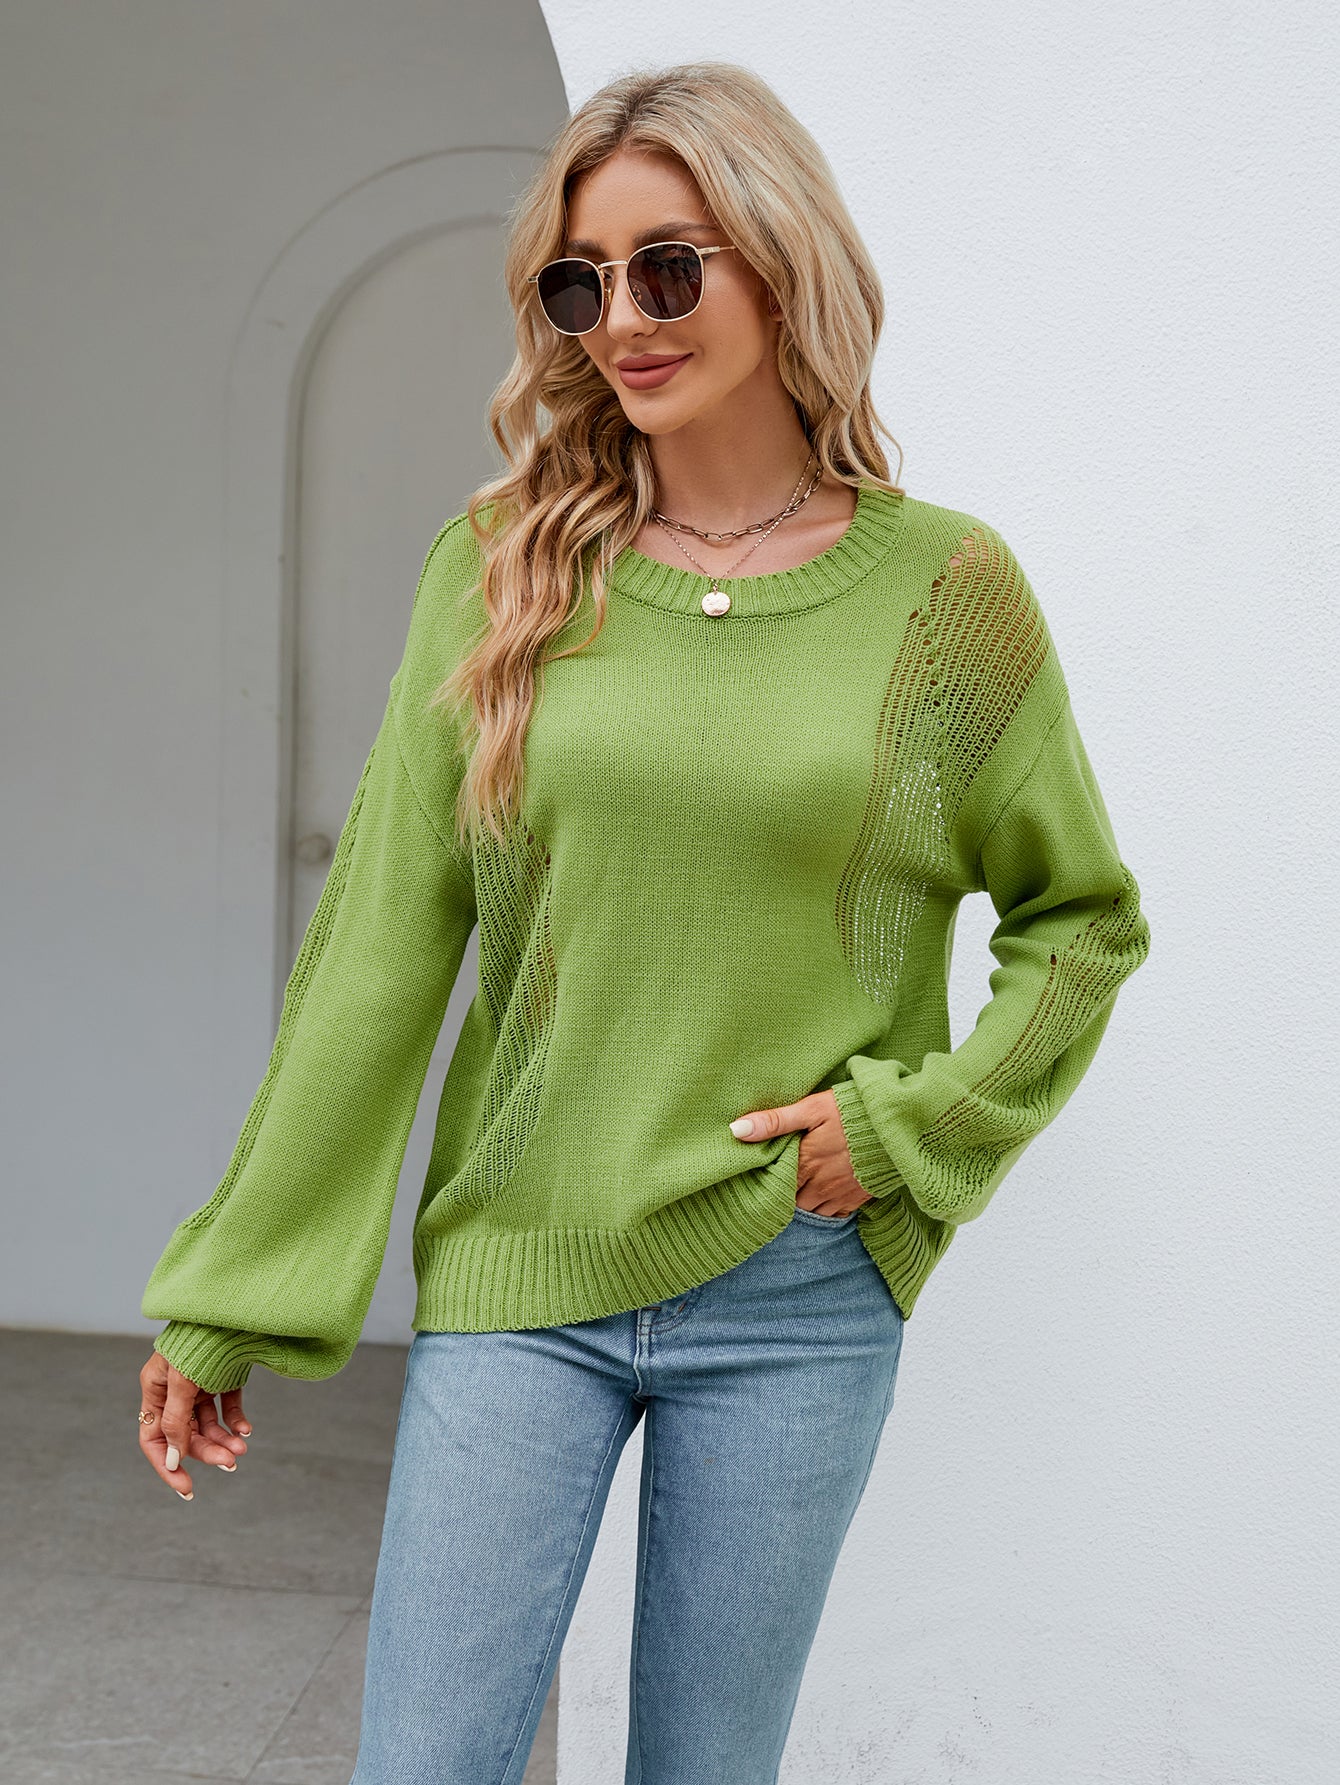 Contemporary Knitwear: Mesh Side Sweater - Perfect for Any Occasion! Sweaters - Chuzko Women Clothing